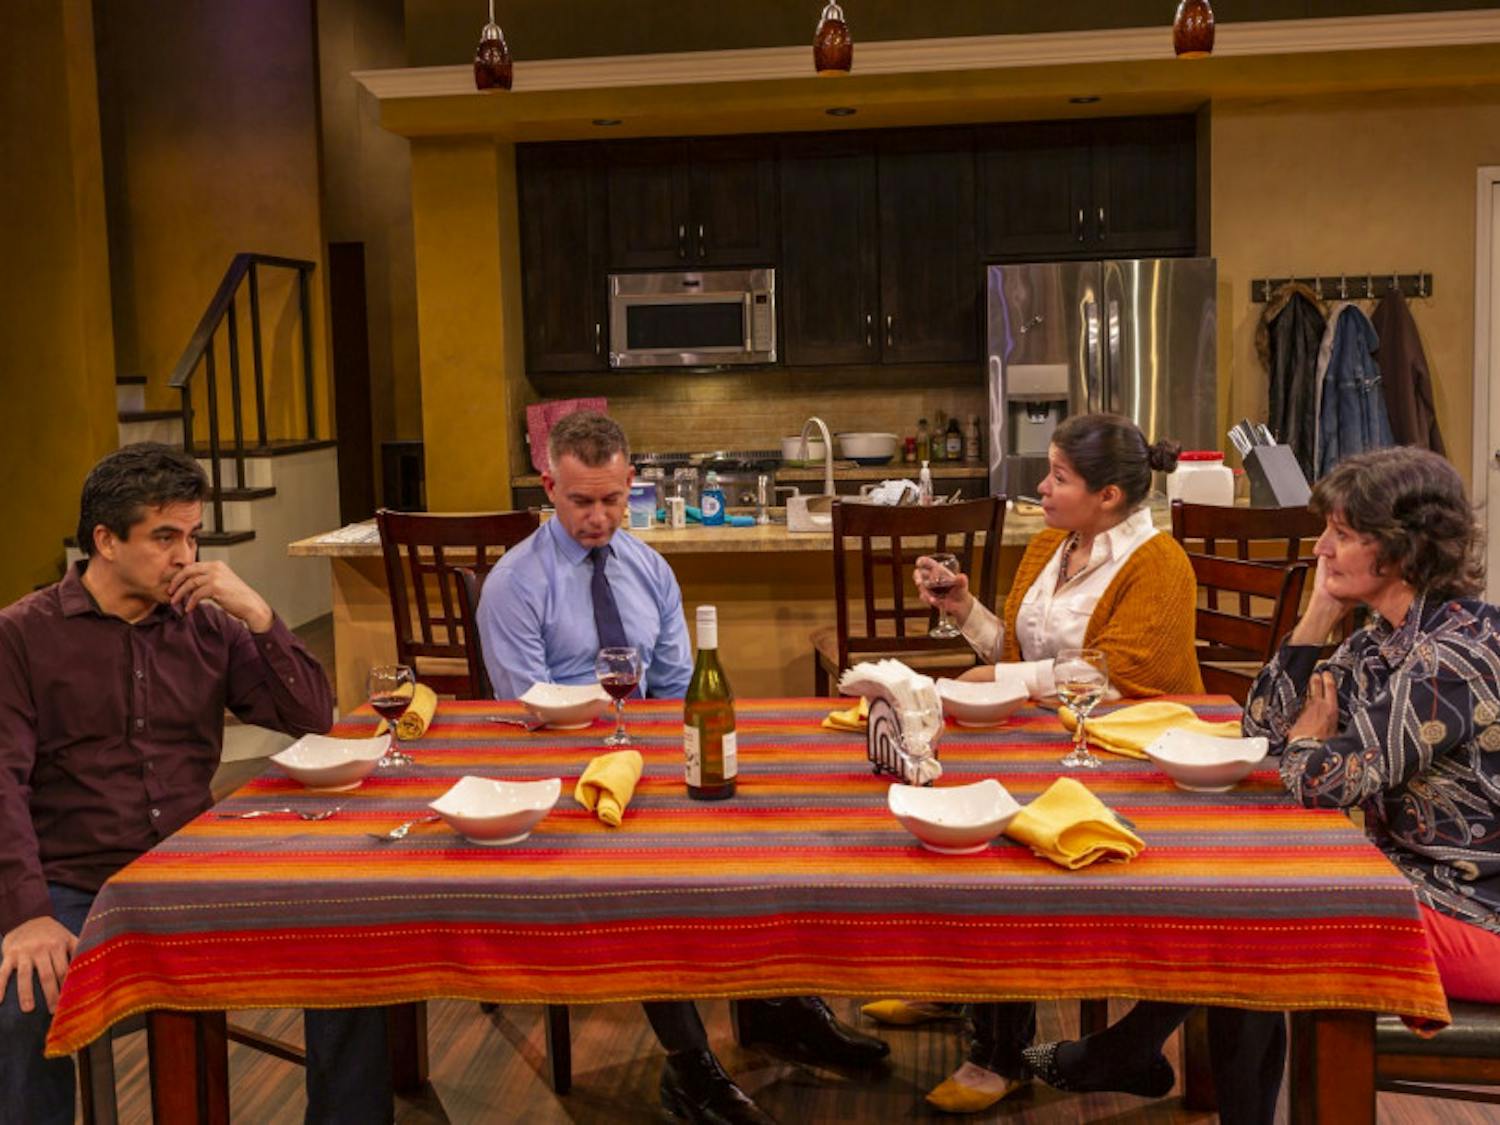 (L-R) Actors Alberto Bonilla, Tim Altmeyer, Maylin Castro and Maryann Towne at the dinner table in the Hippodrome's "The Blameless."